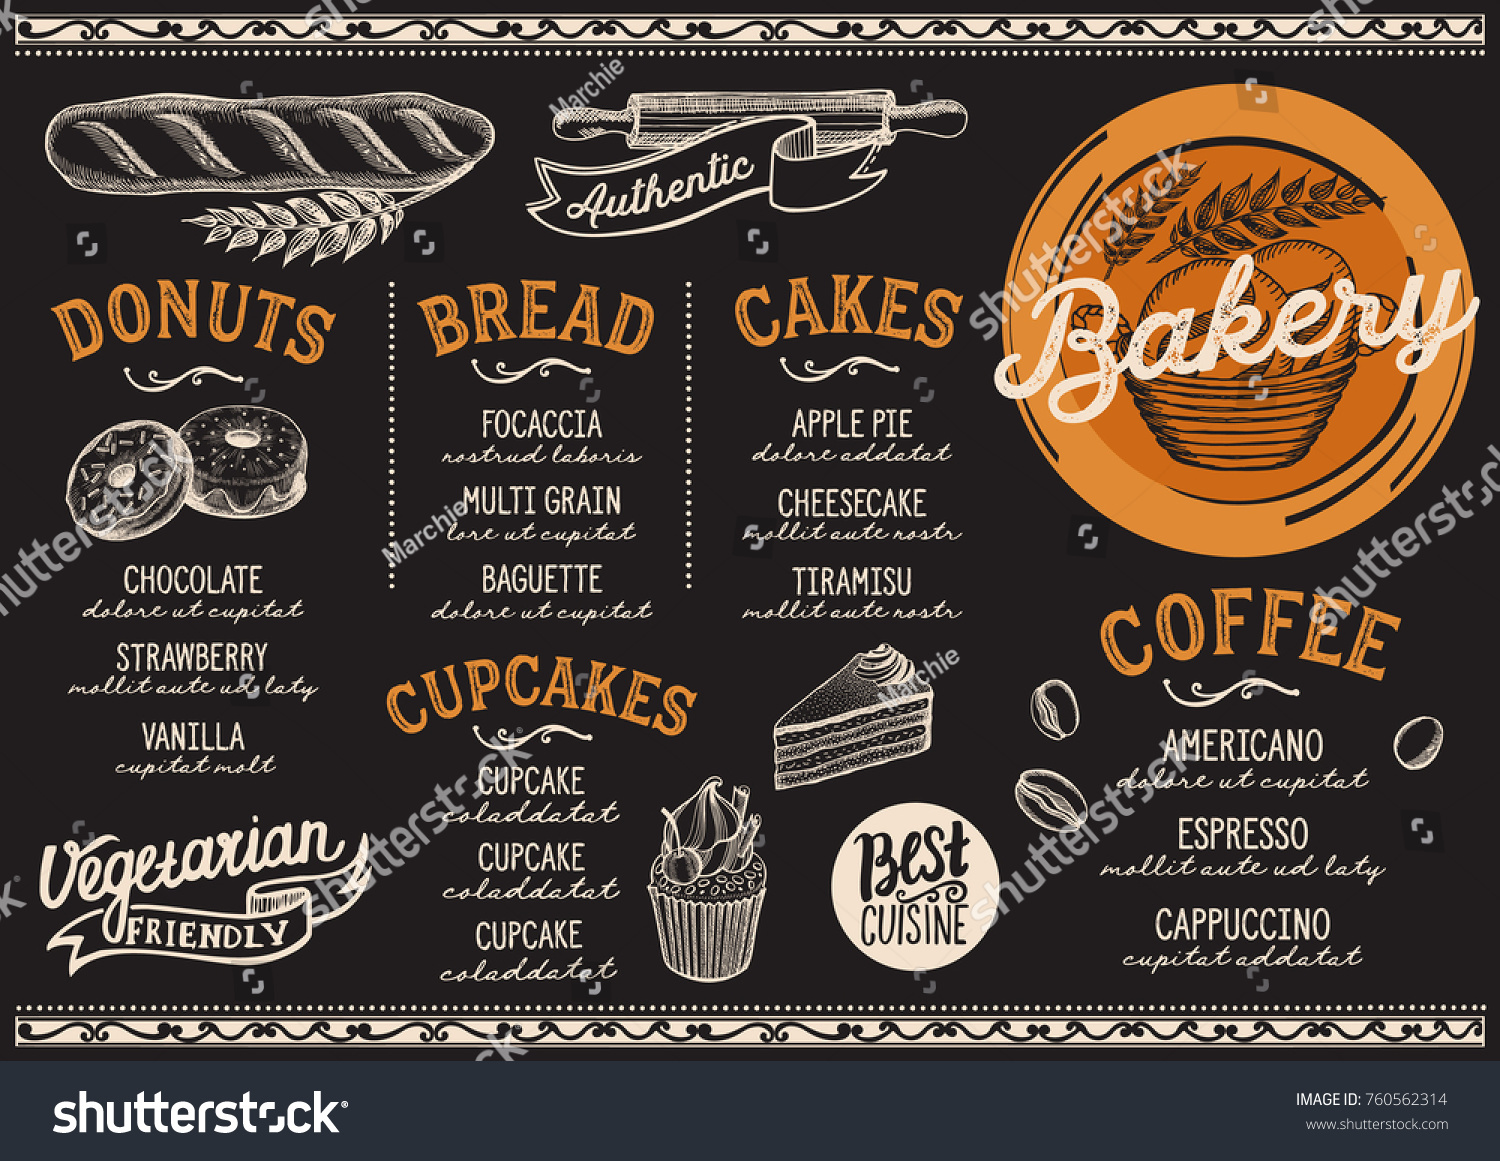 Stock Vector Bakery Dessert Menu For Restaurant And Cafe Design Template With Food Hand Drawn Graphic 760562314 